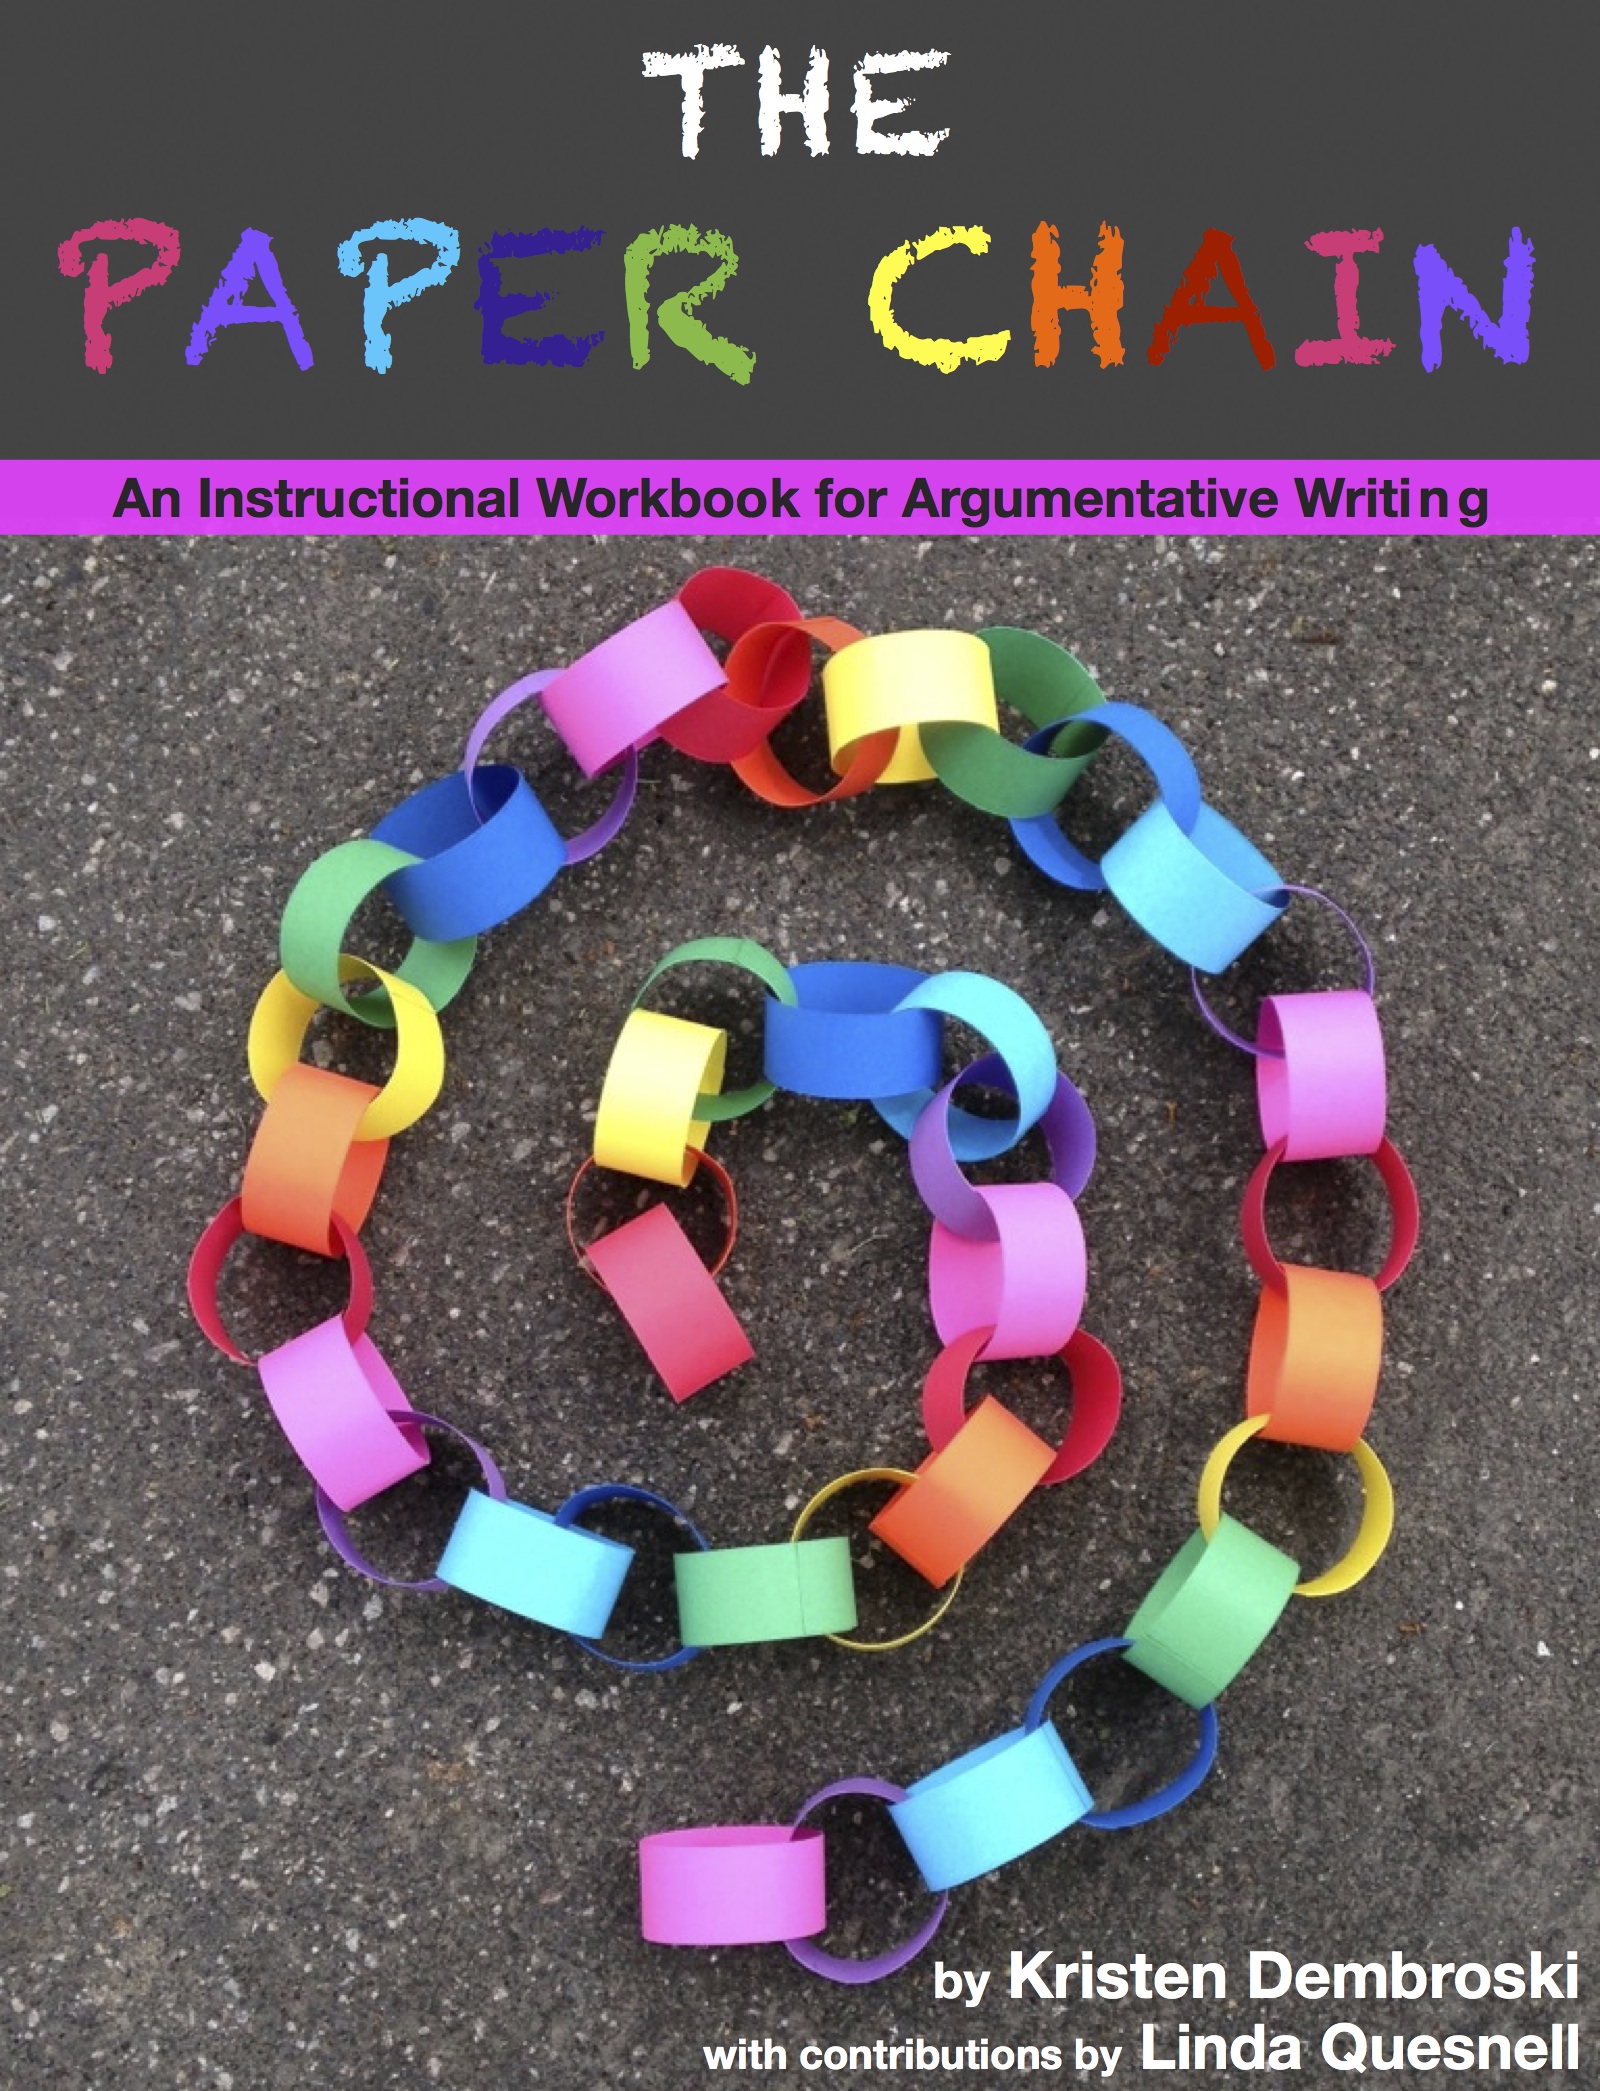 The Paper Chain: An Instructional Workbook for Argumentative Writing (c) Kristen Dembroski